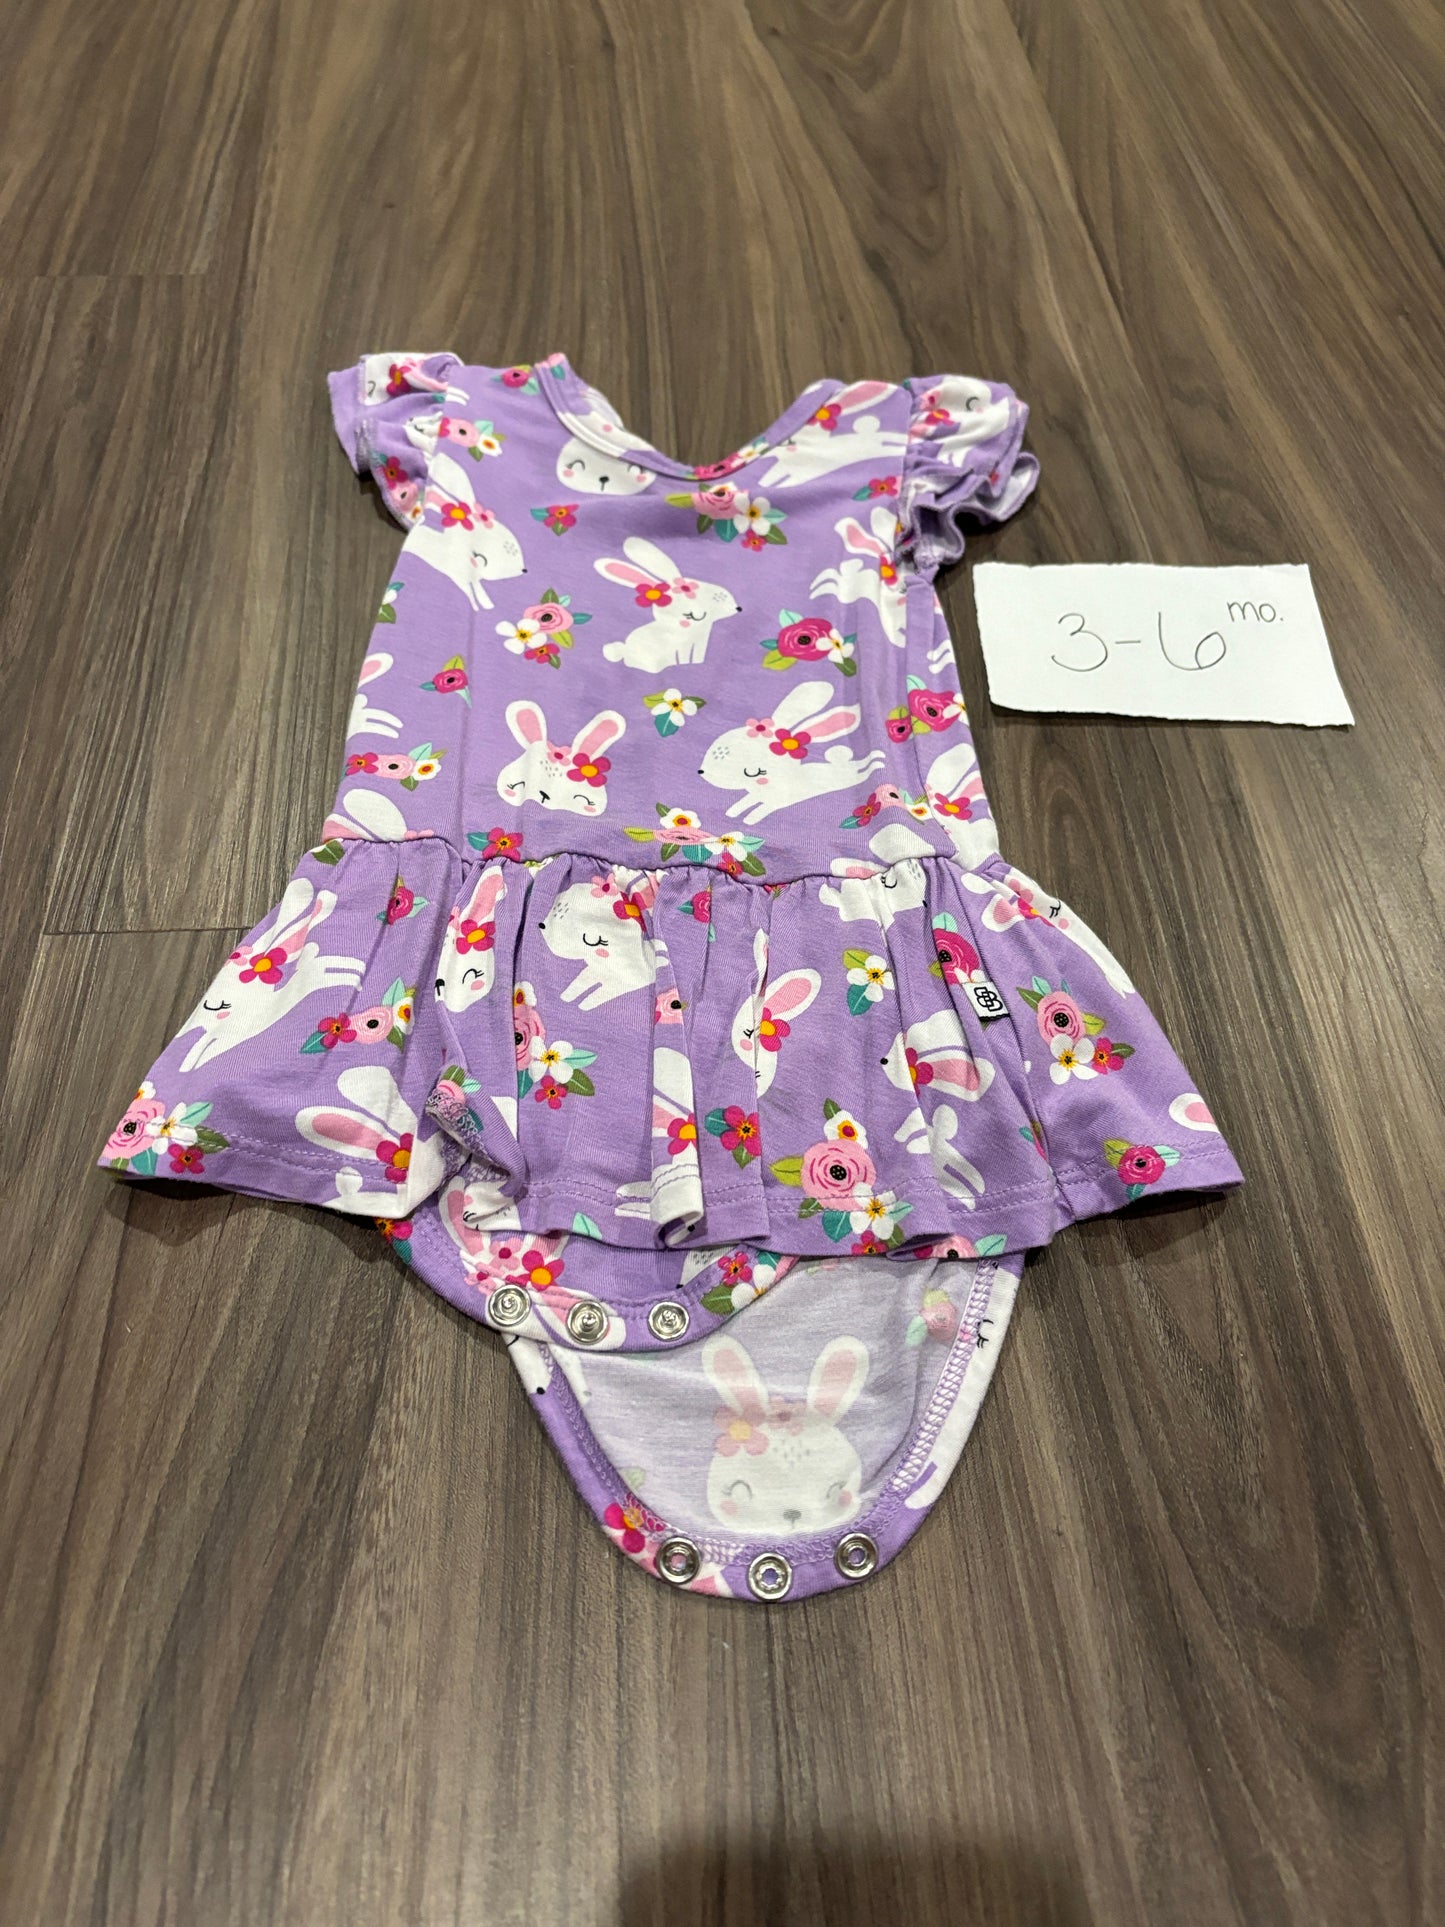 3-6 Mo - Bums & Roses - Purple Bunny Bodysuit Twirl - PU 45236 Except Semiannual Sale